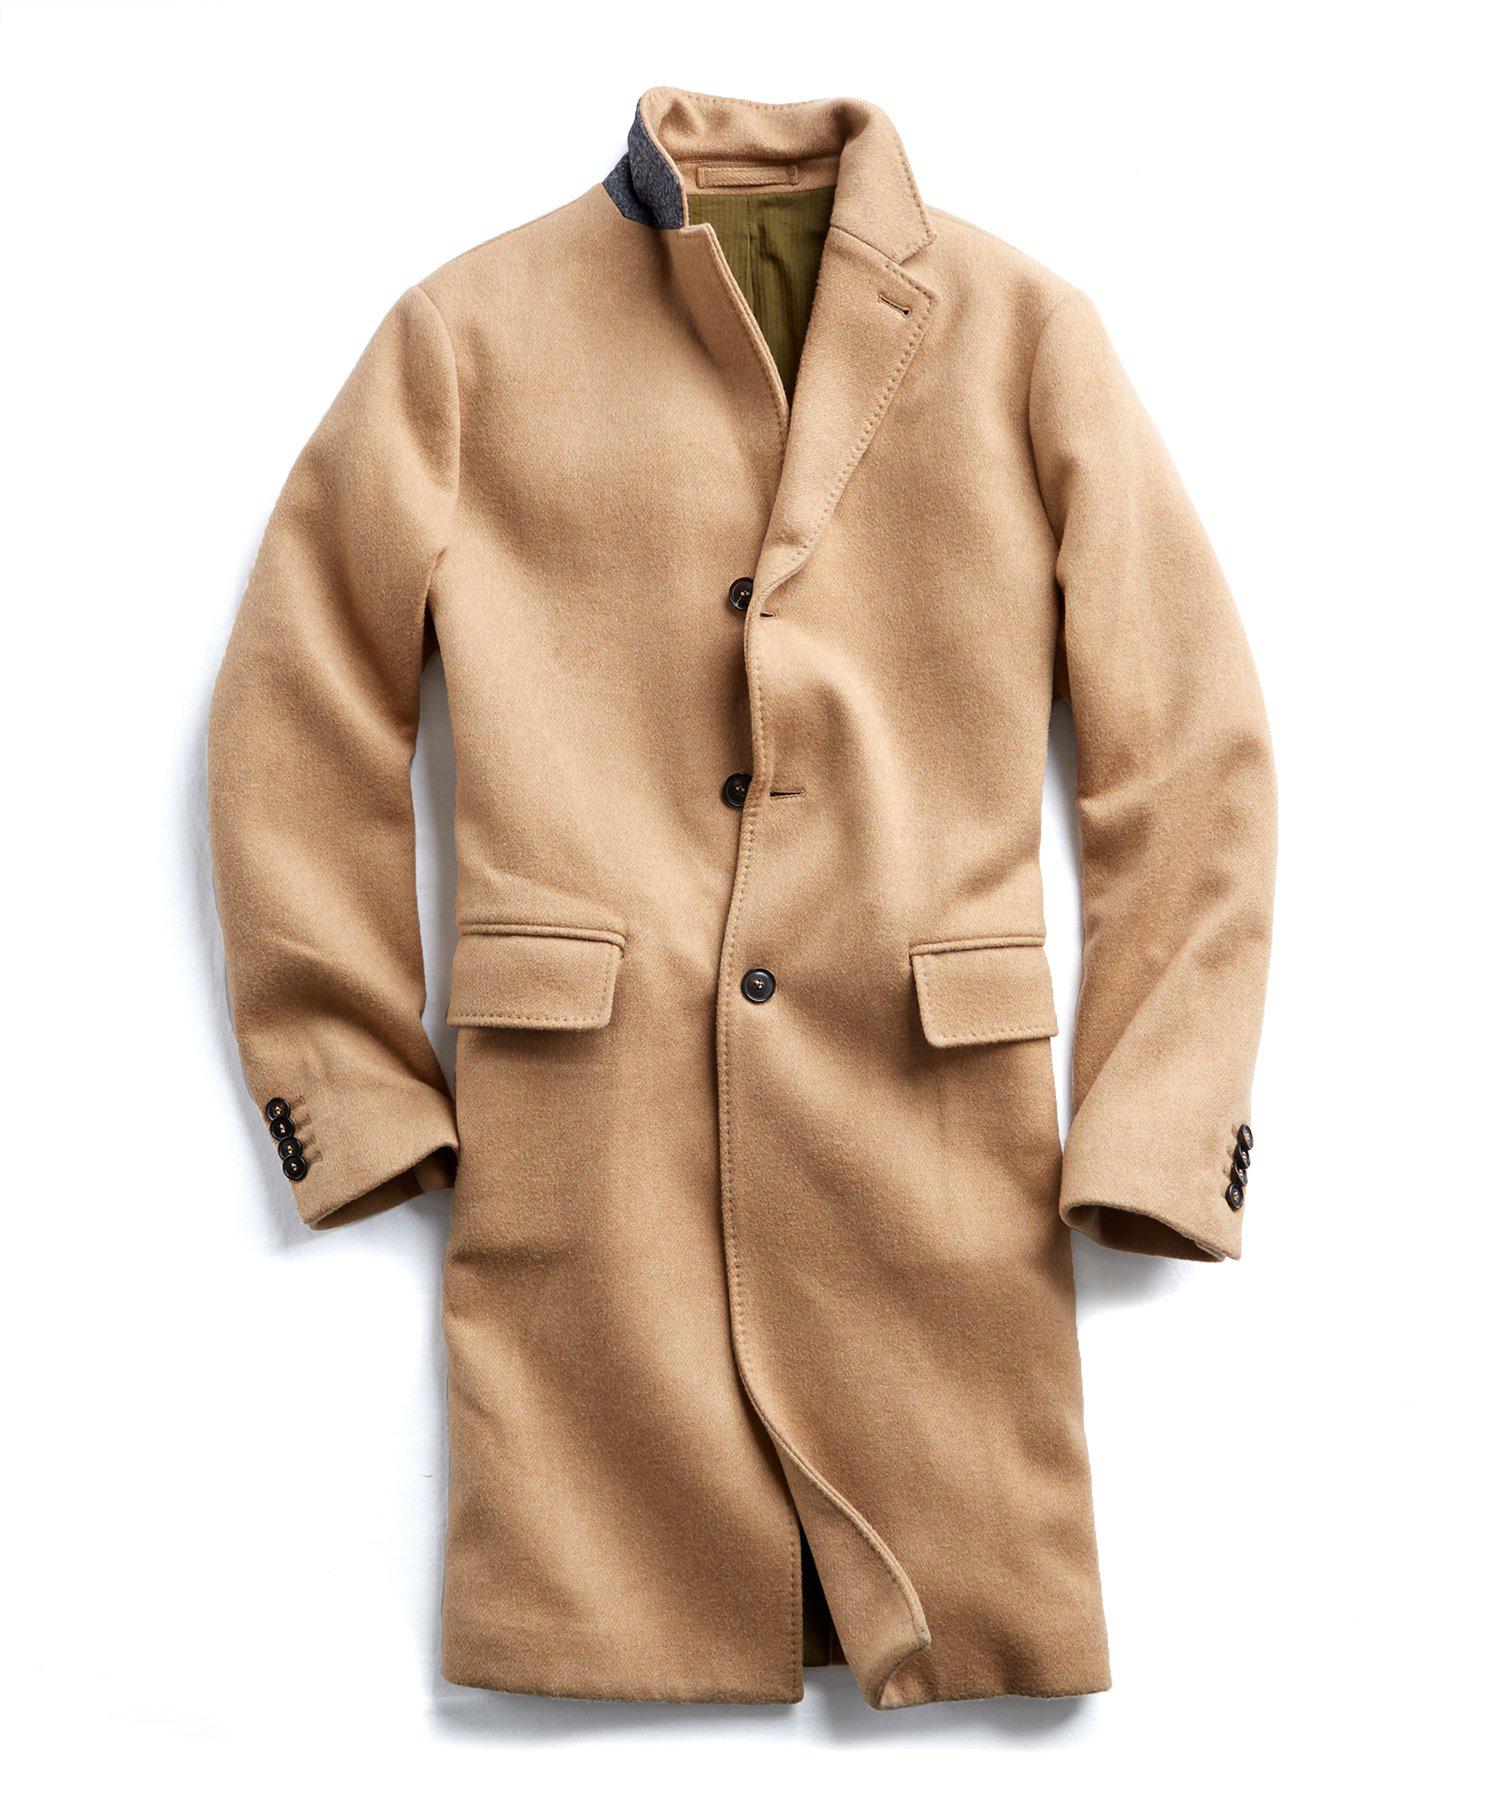 Todd Snyder Italian Wool Cashmere Camel Topcoat in Natural for Men - Lyst